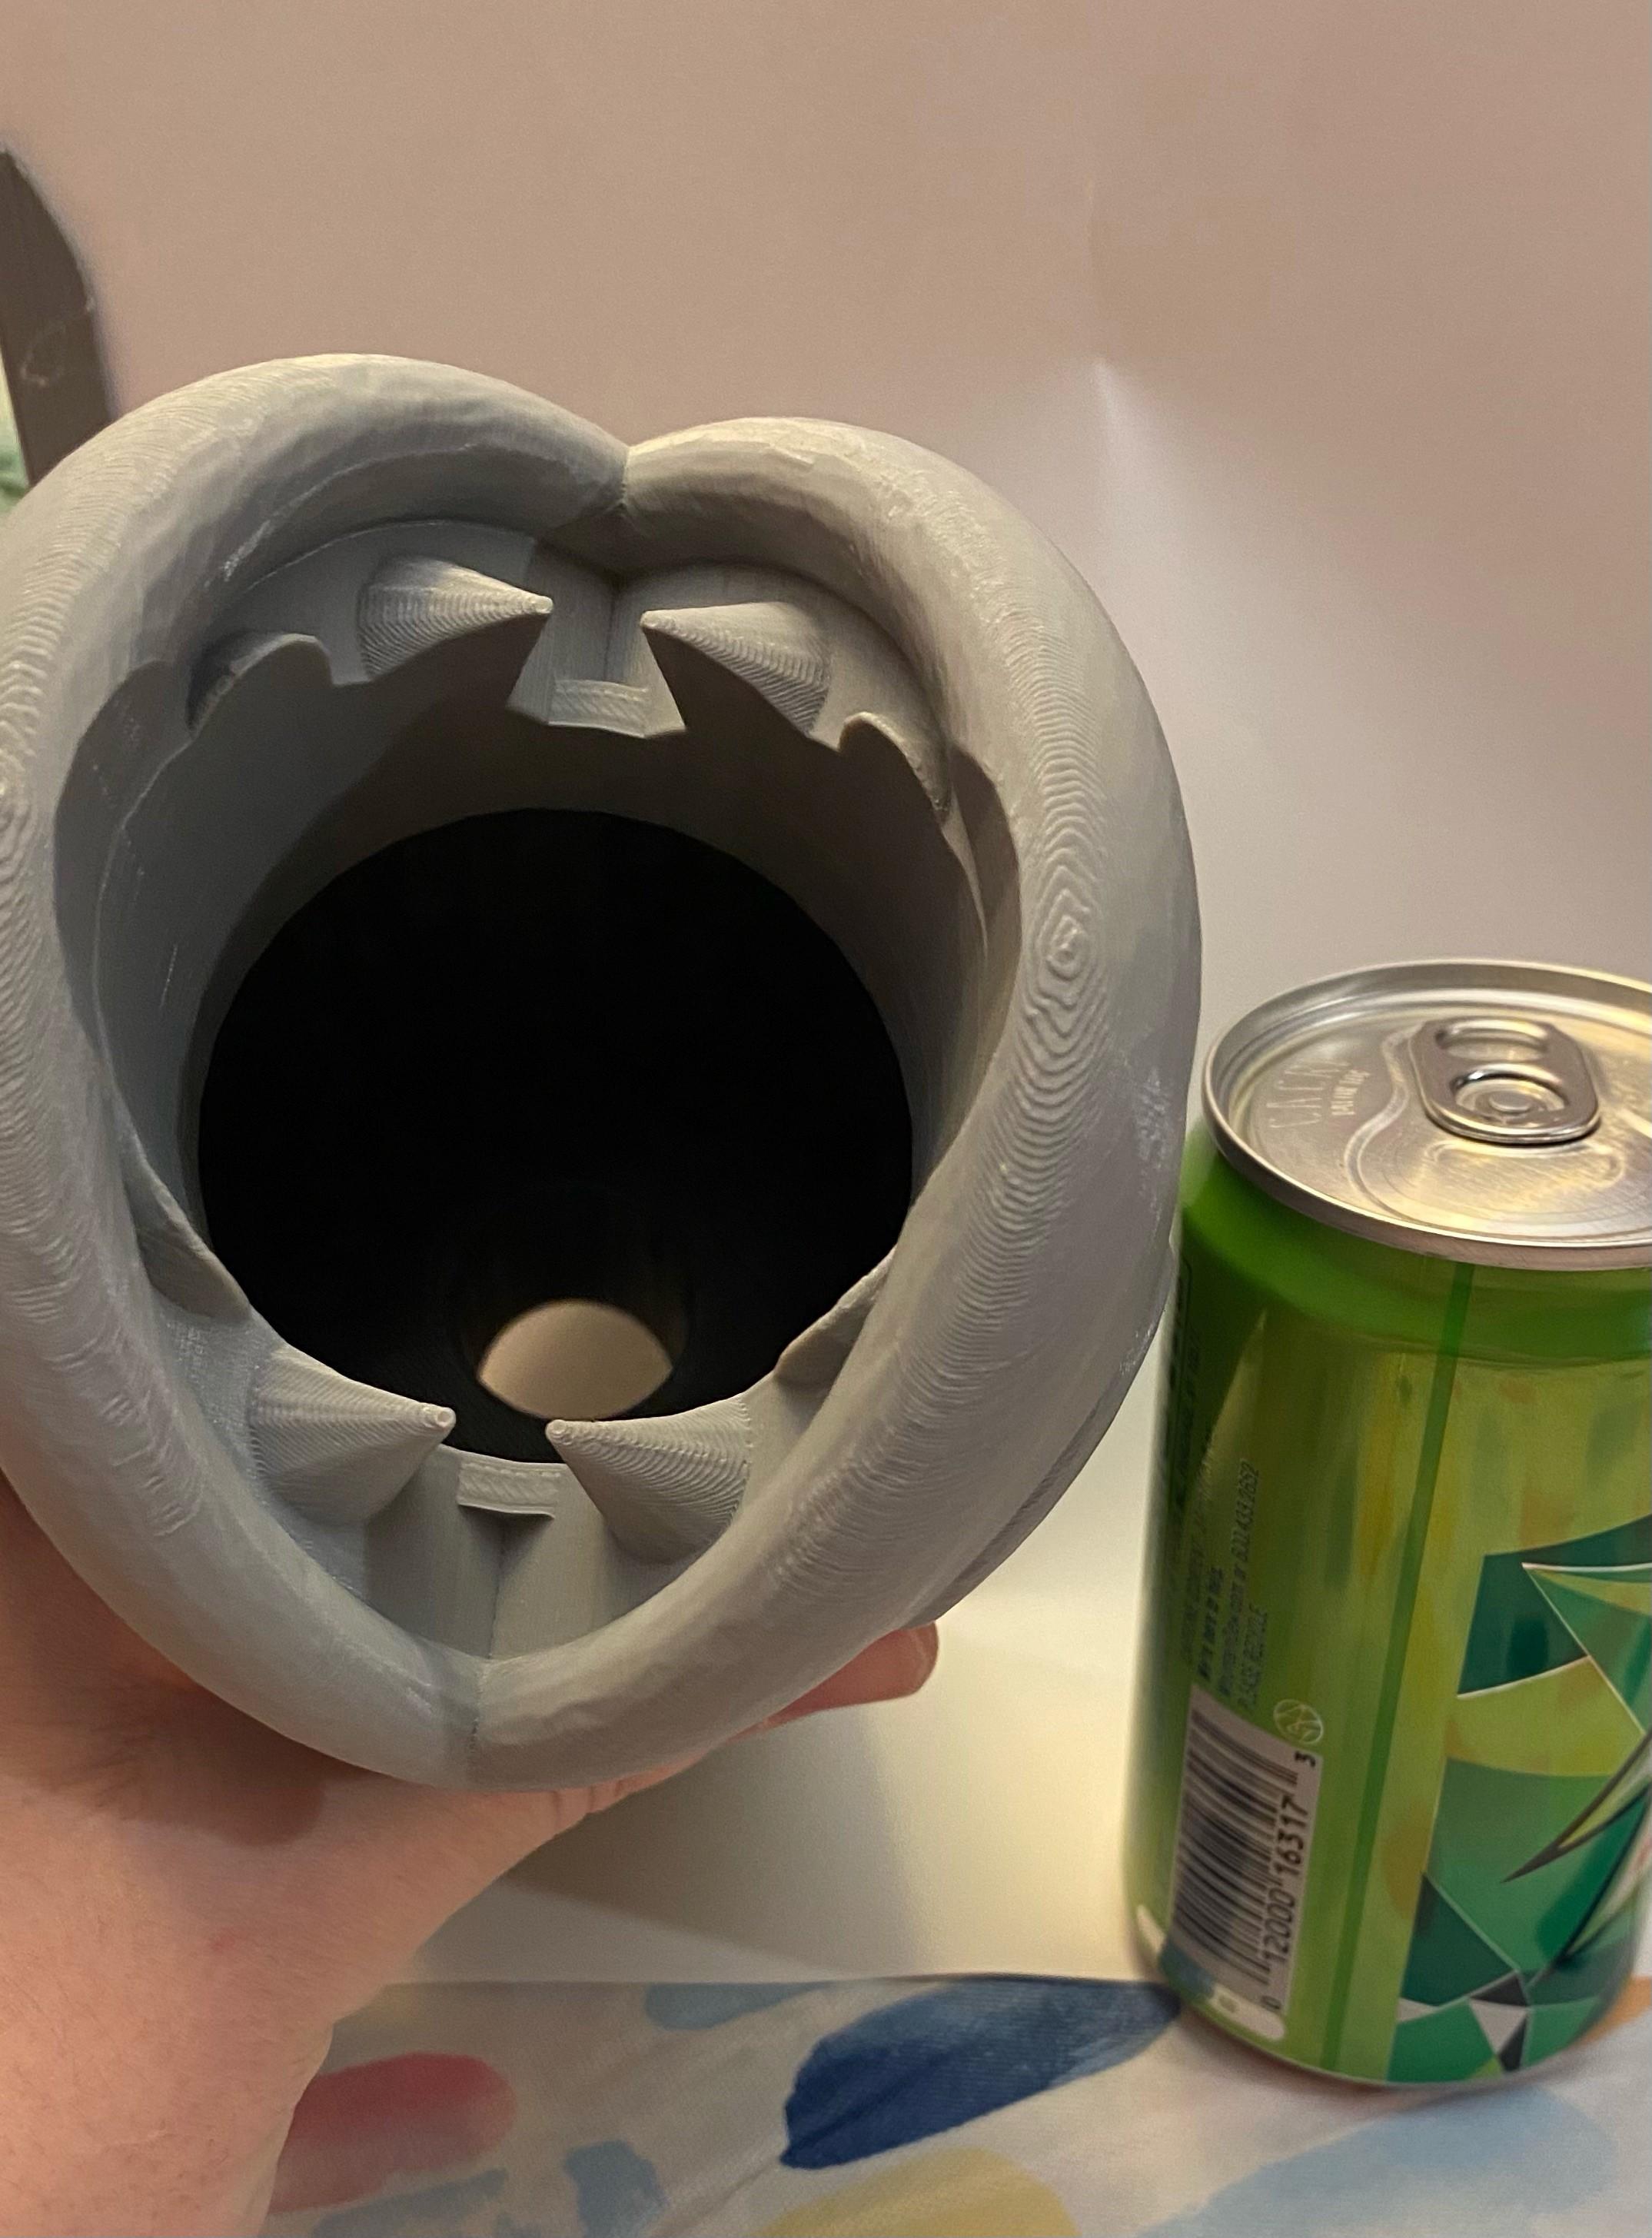 Mini can holder for switch cup - Petey Piranha 3d model